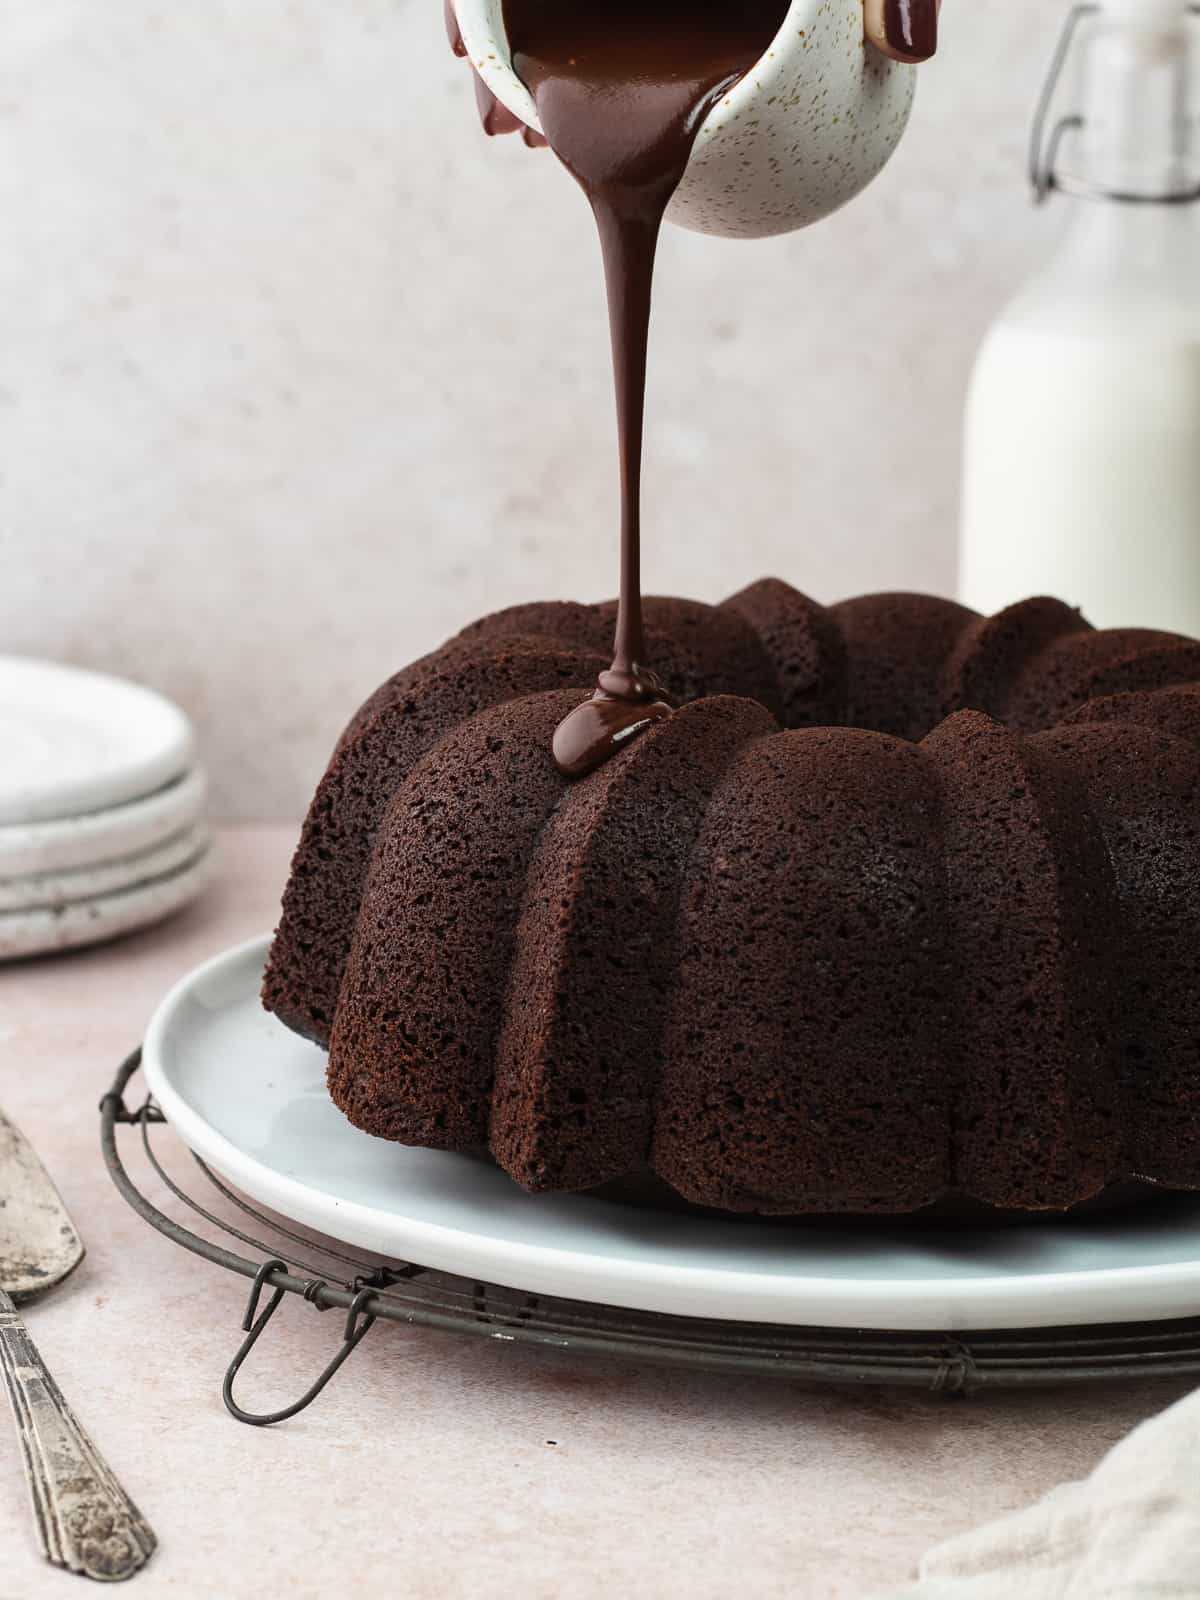 Pouring chocolate ganache on chocolate olive oil cake